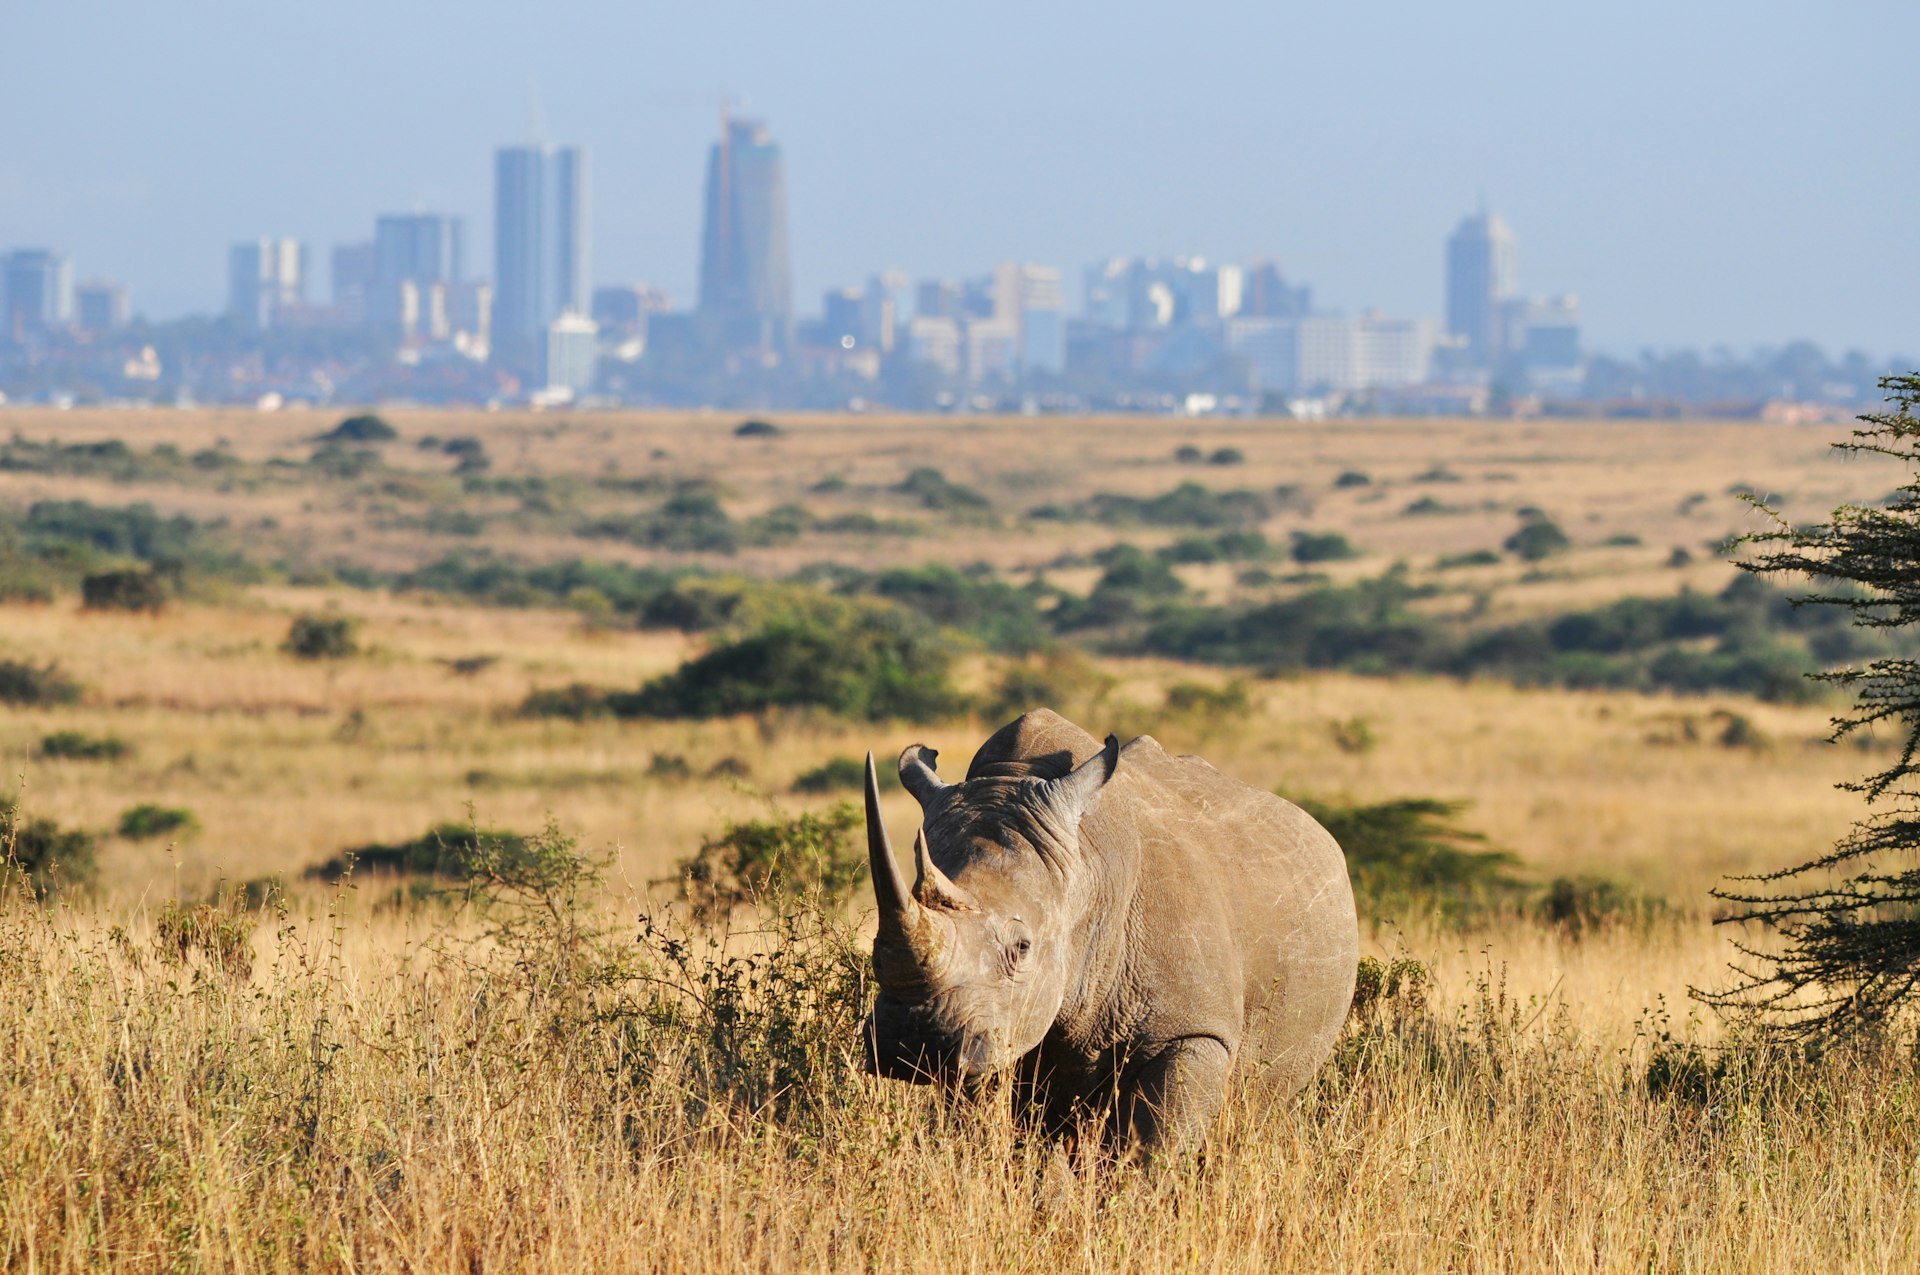 A rhino in front of the Nairobi skyline